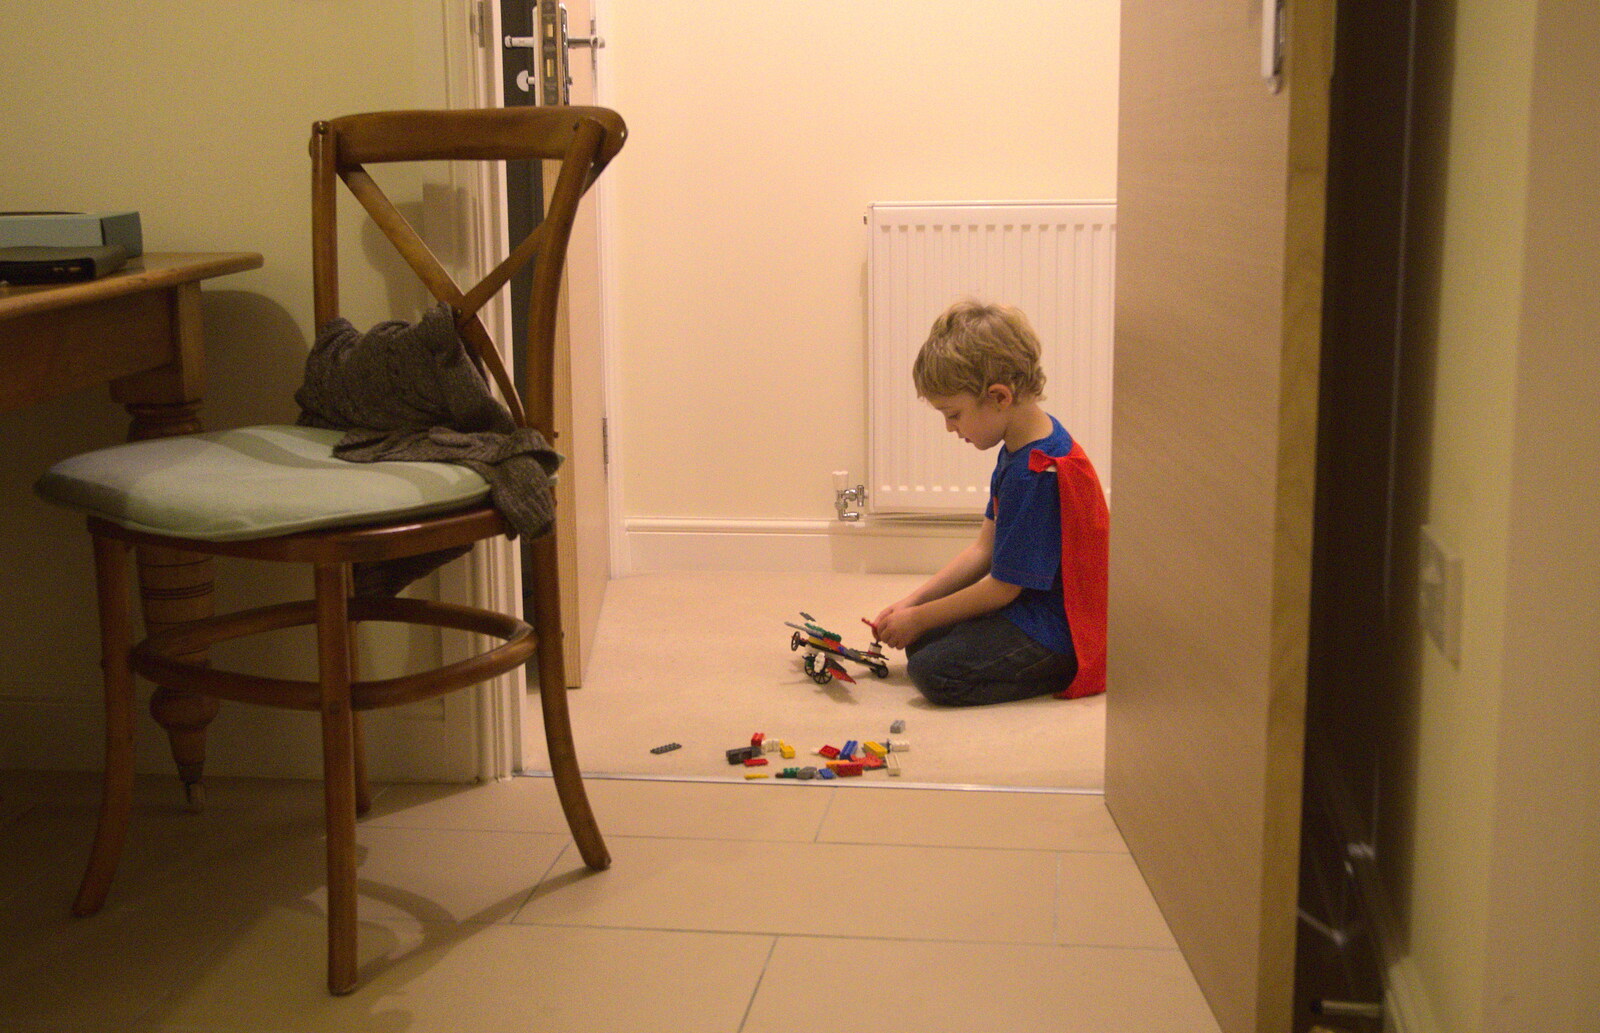 Fred builds Lego in the hall from A Few Days in Spreyton, Devon - 26th October 2013